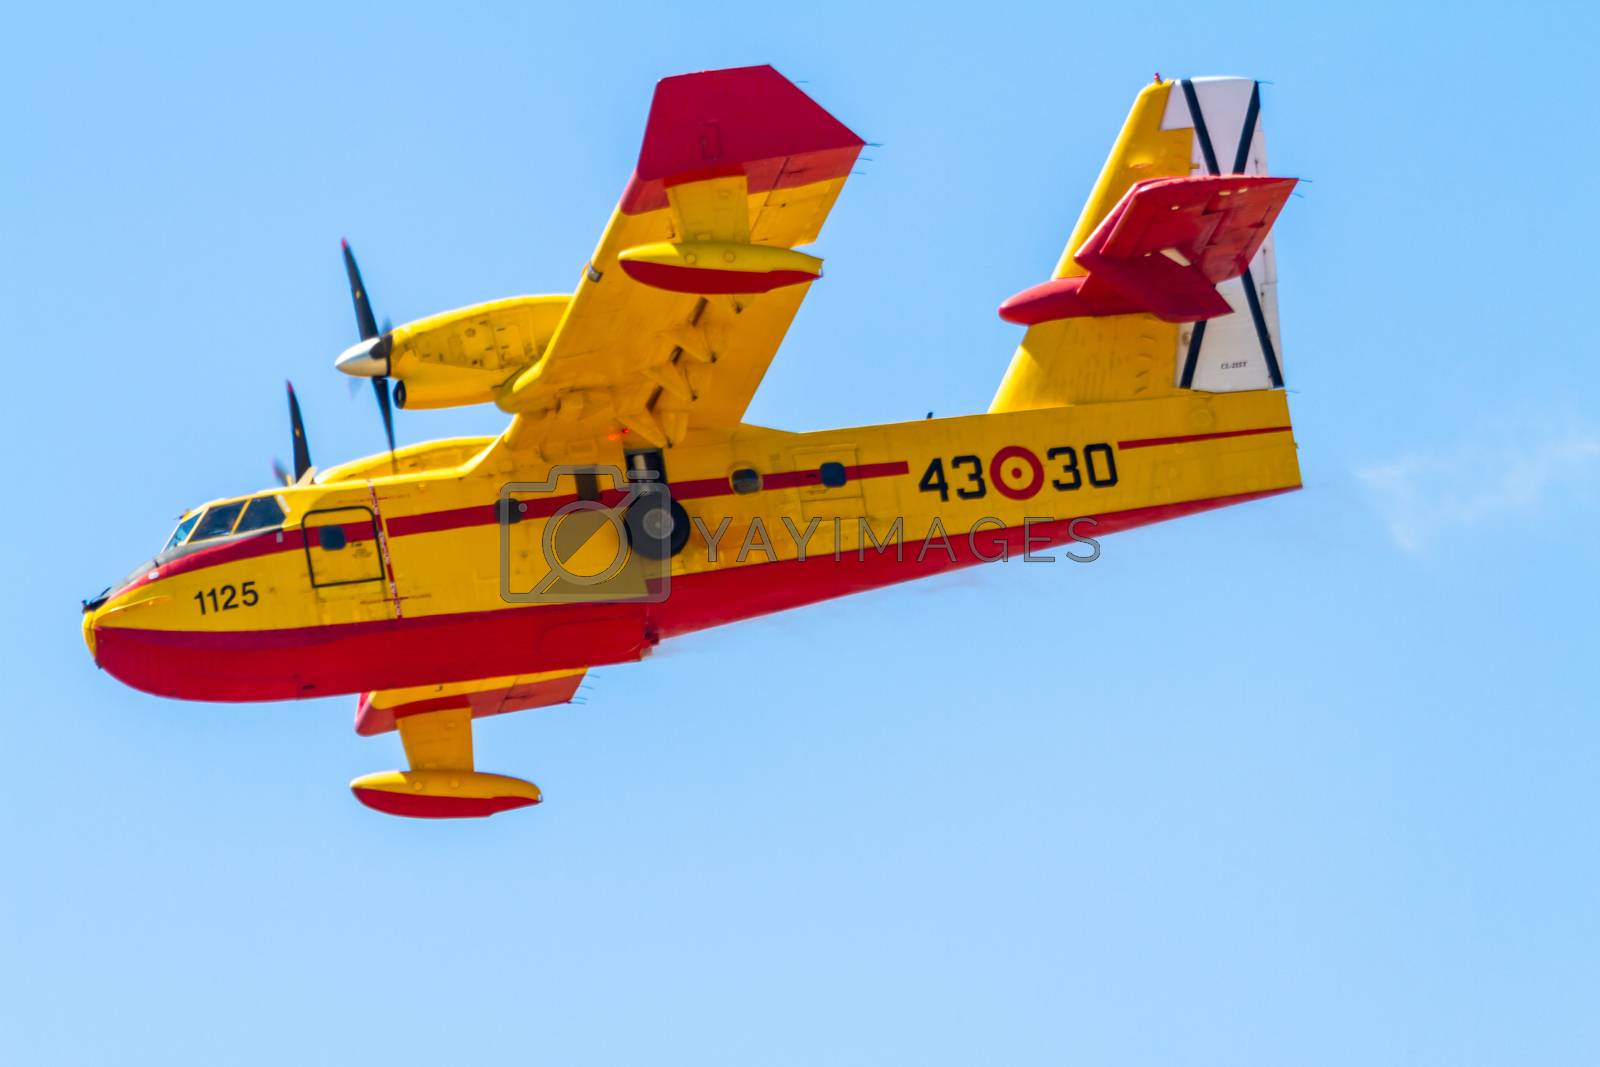 Royalty free image of Seaplane Canadair CL-215  by viledevil